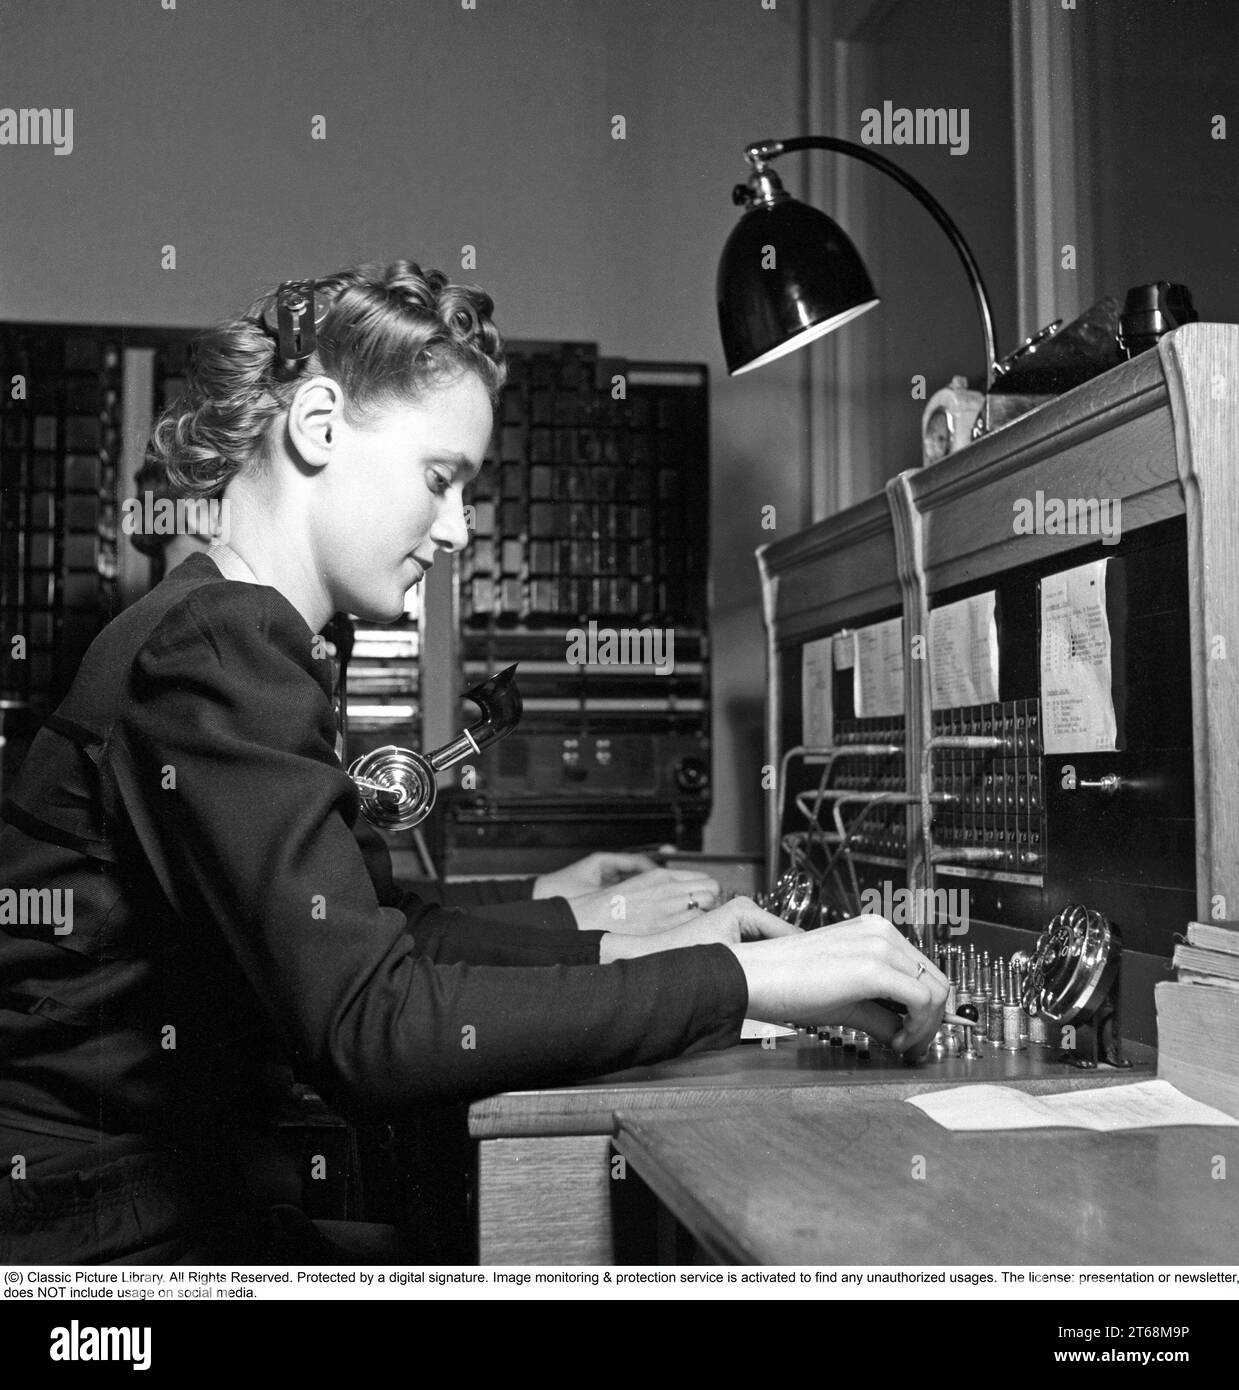 A young woman works in the company's switchboard 1942. She connects the incoming and outgoing calls to the right person using cords for the respective telephones in a so-called cord switch. The hairstyle is typical of the 1940s.  Sweden in 1942. Kristoffersson ref A120-1 Stock Photo